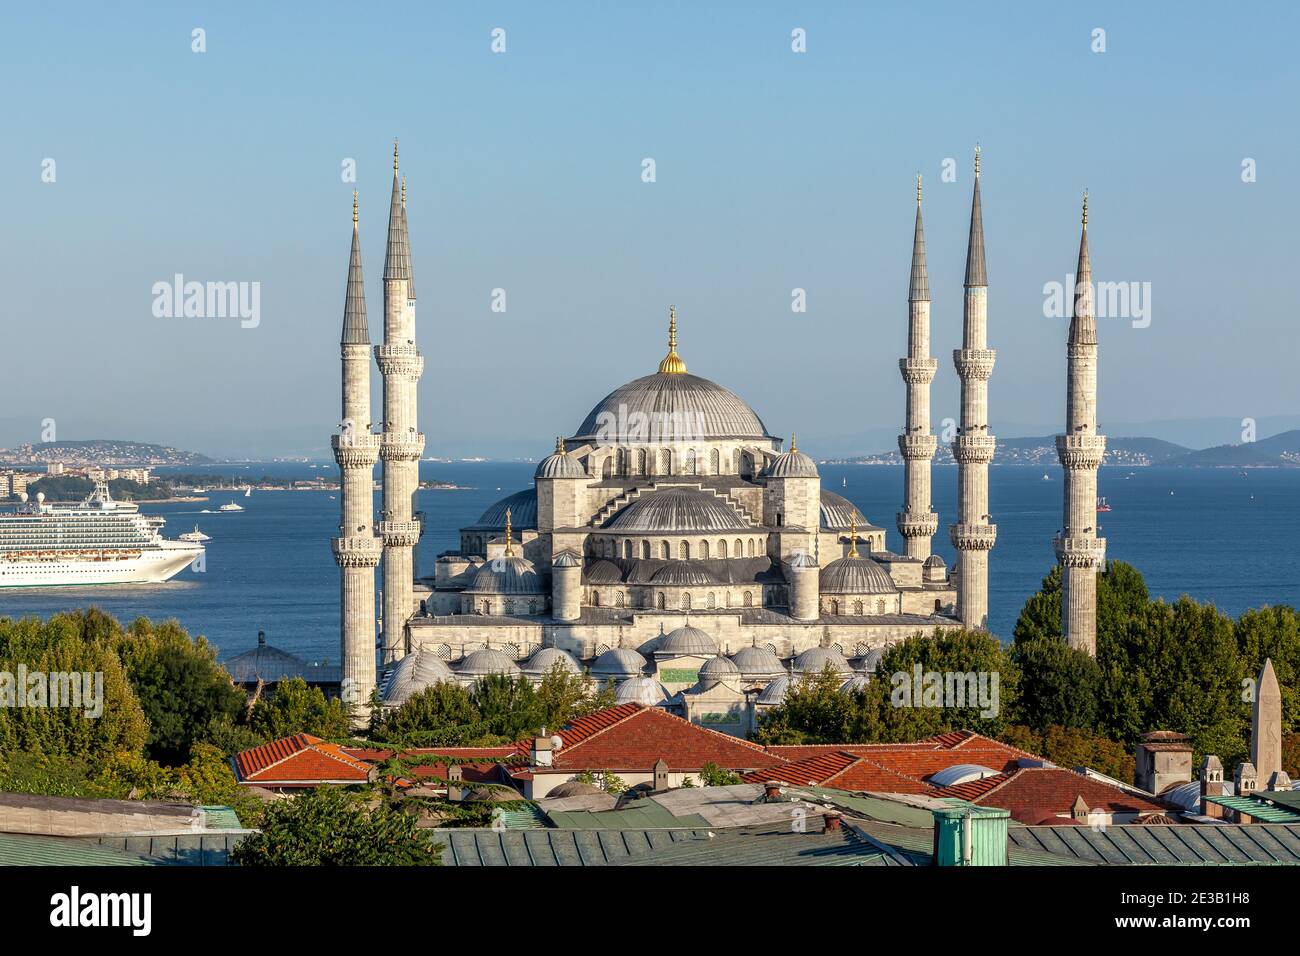 The Blue Mosque with domes and six minarets Stock Photo